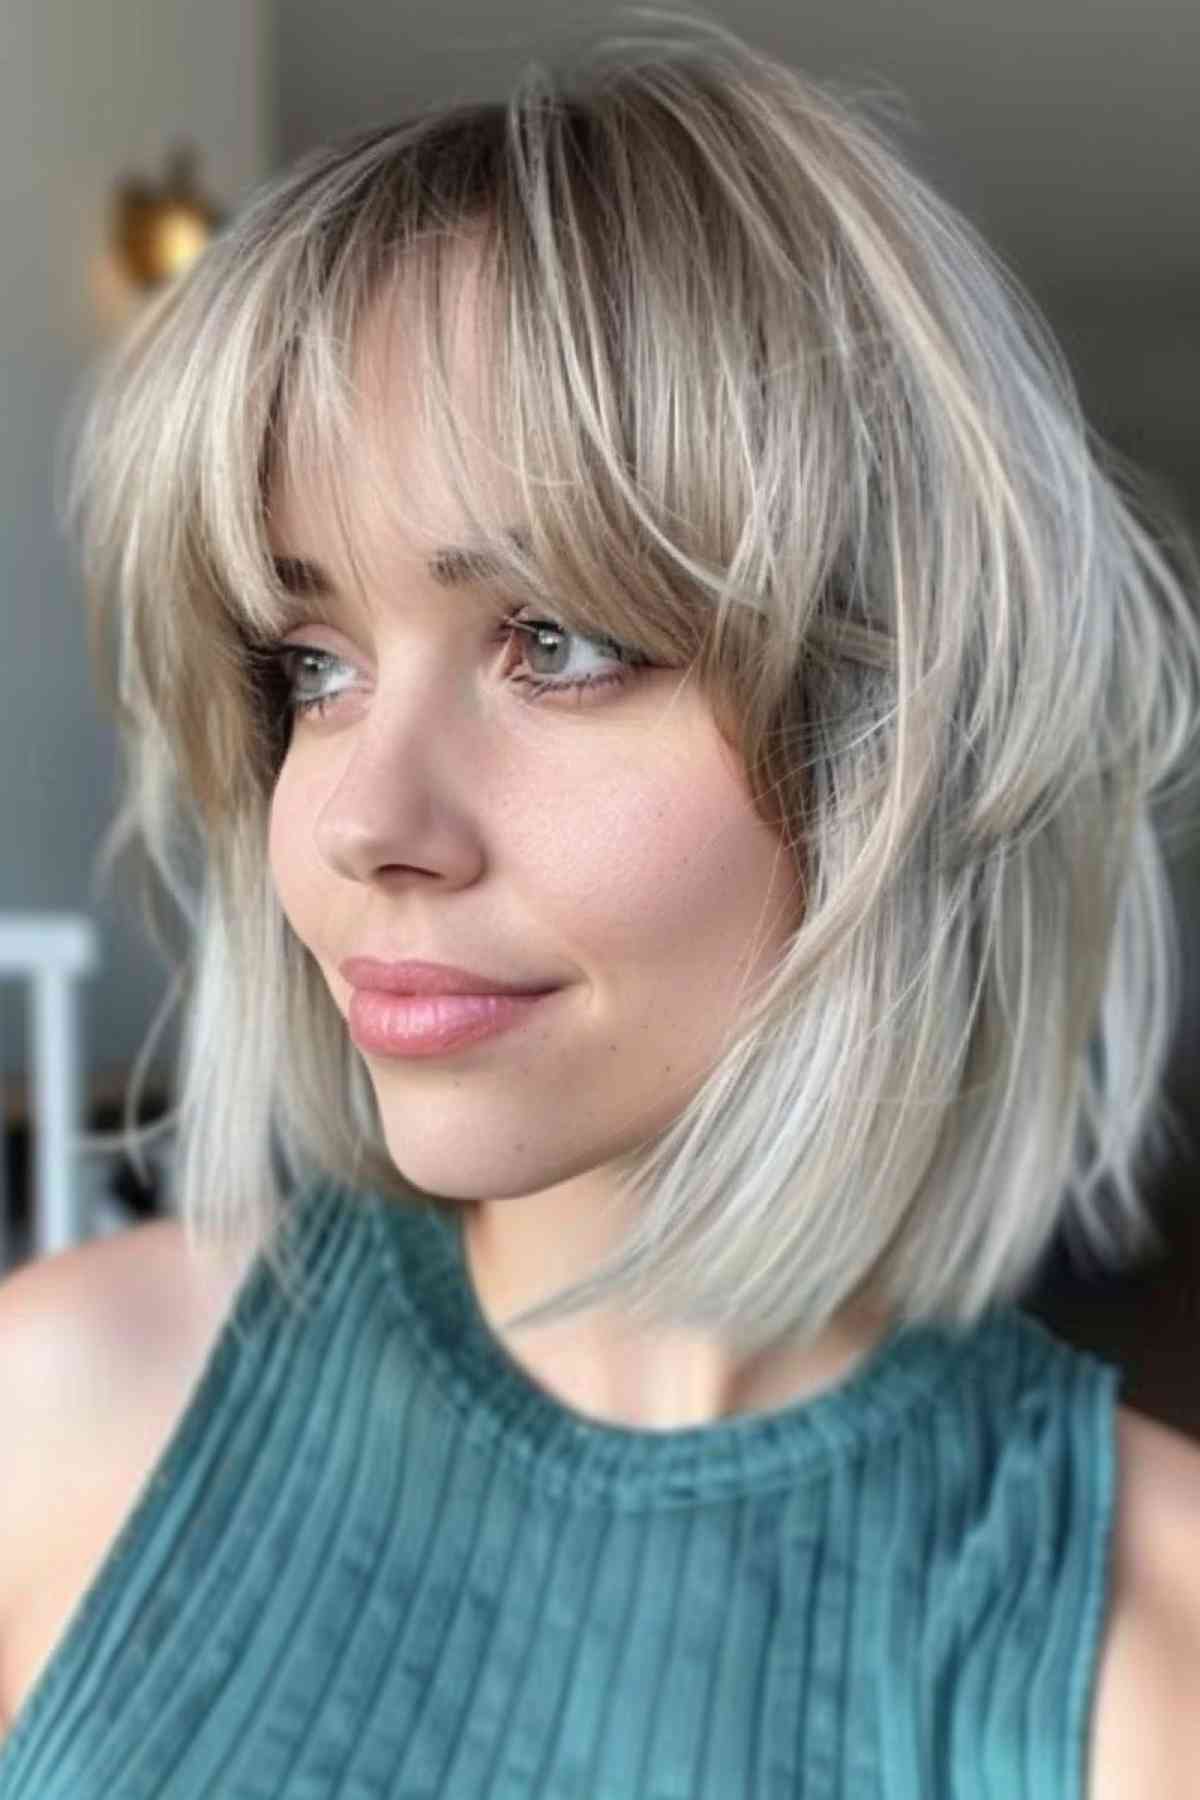 Young woman with a blunt textured lob and feathered bangs hairstyle